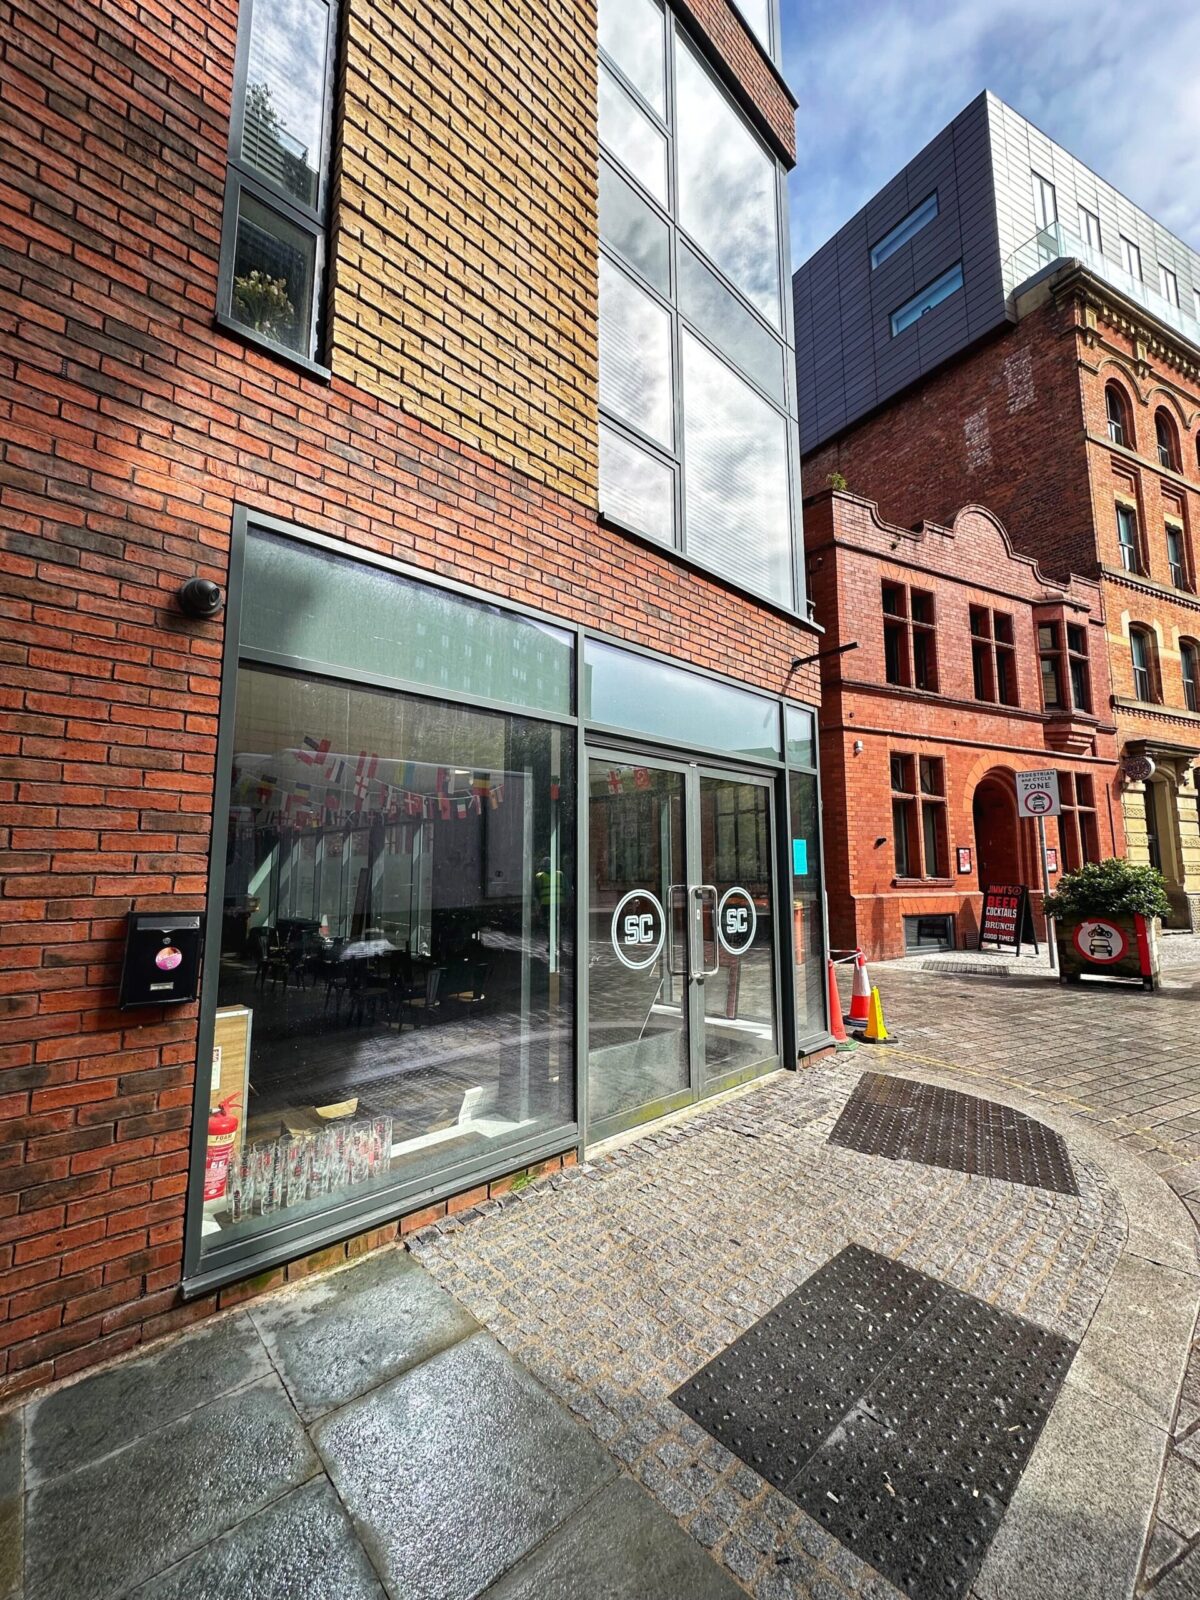 second city reopening as new ancoats pop-up bar for euro 2024